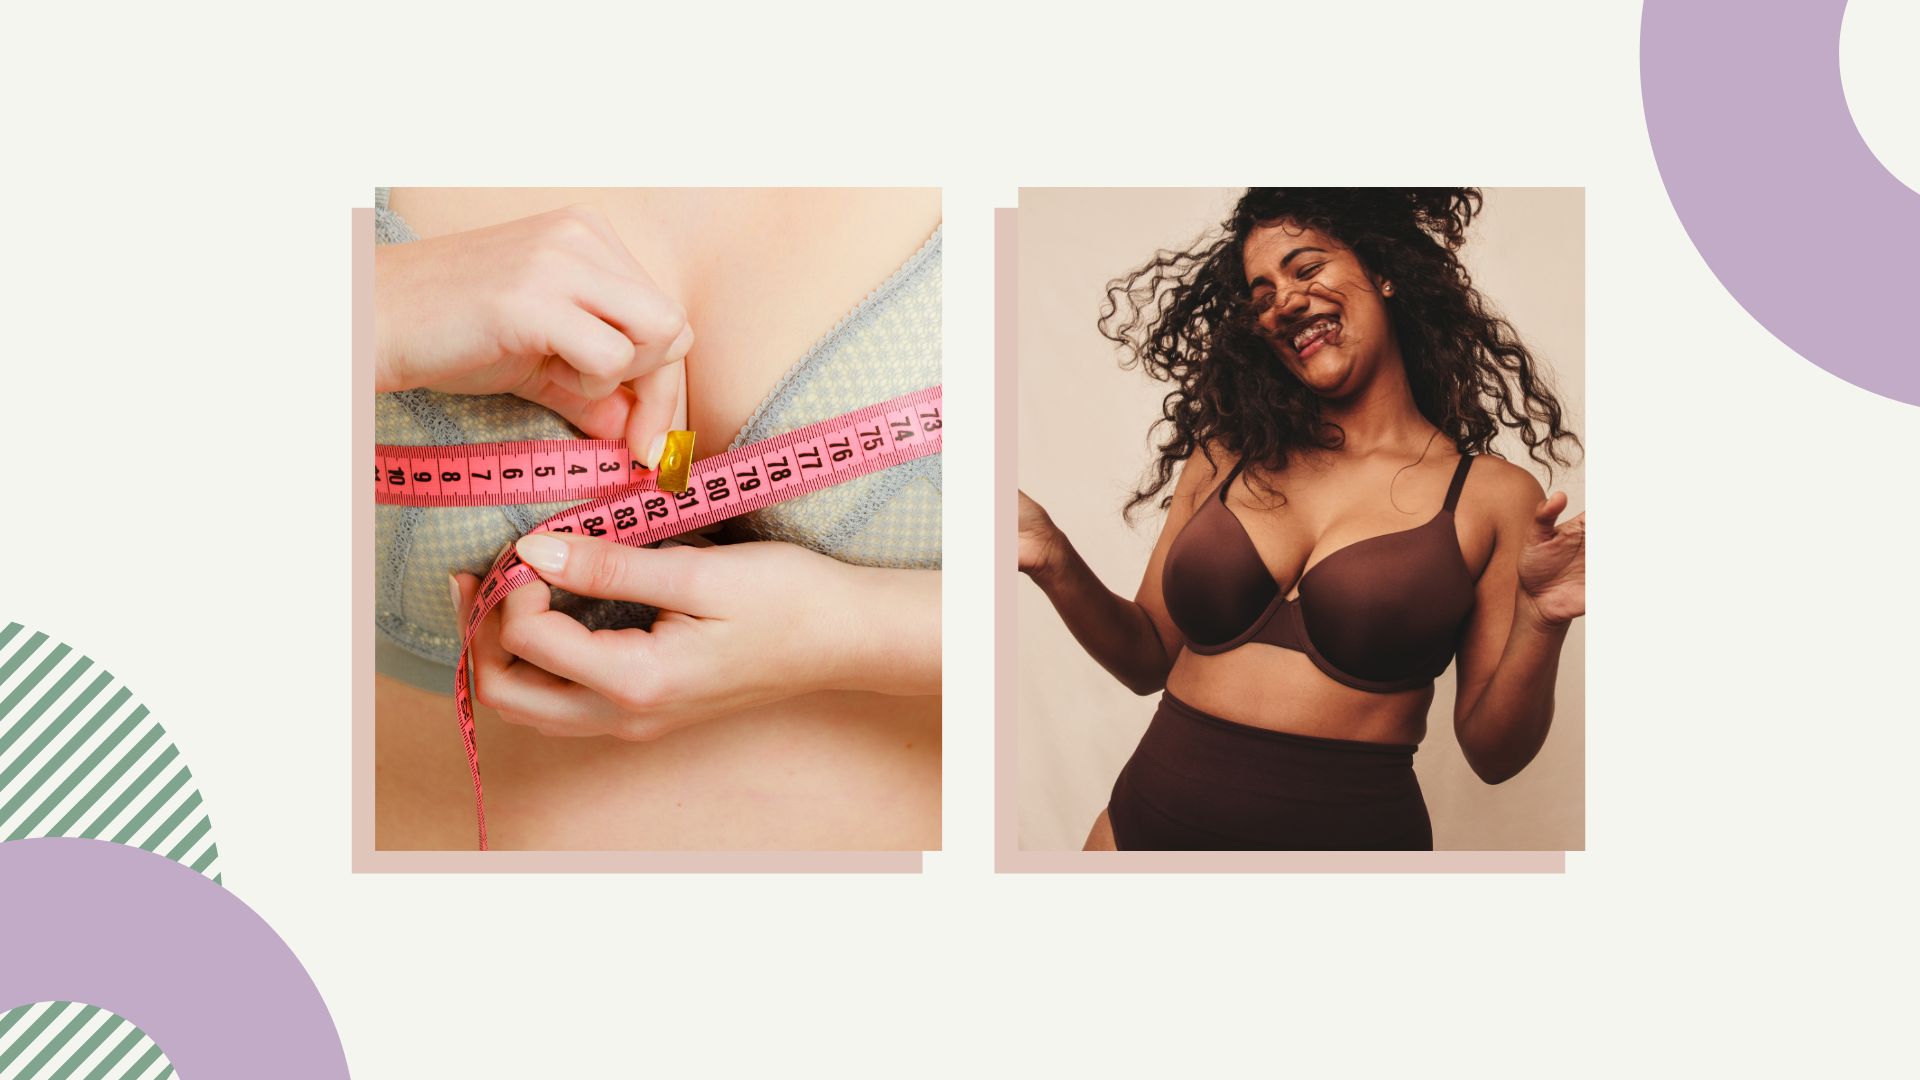 How to measure bra size at home: A simple 4-step guide